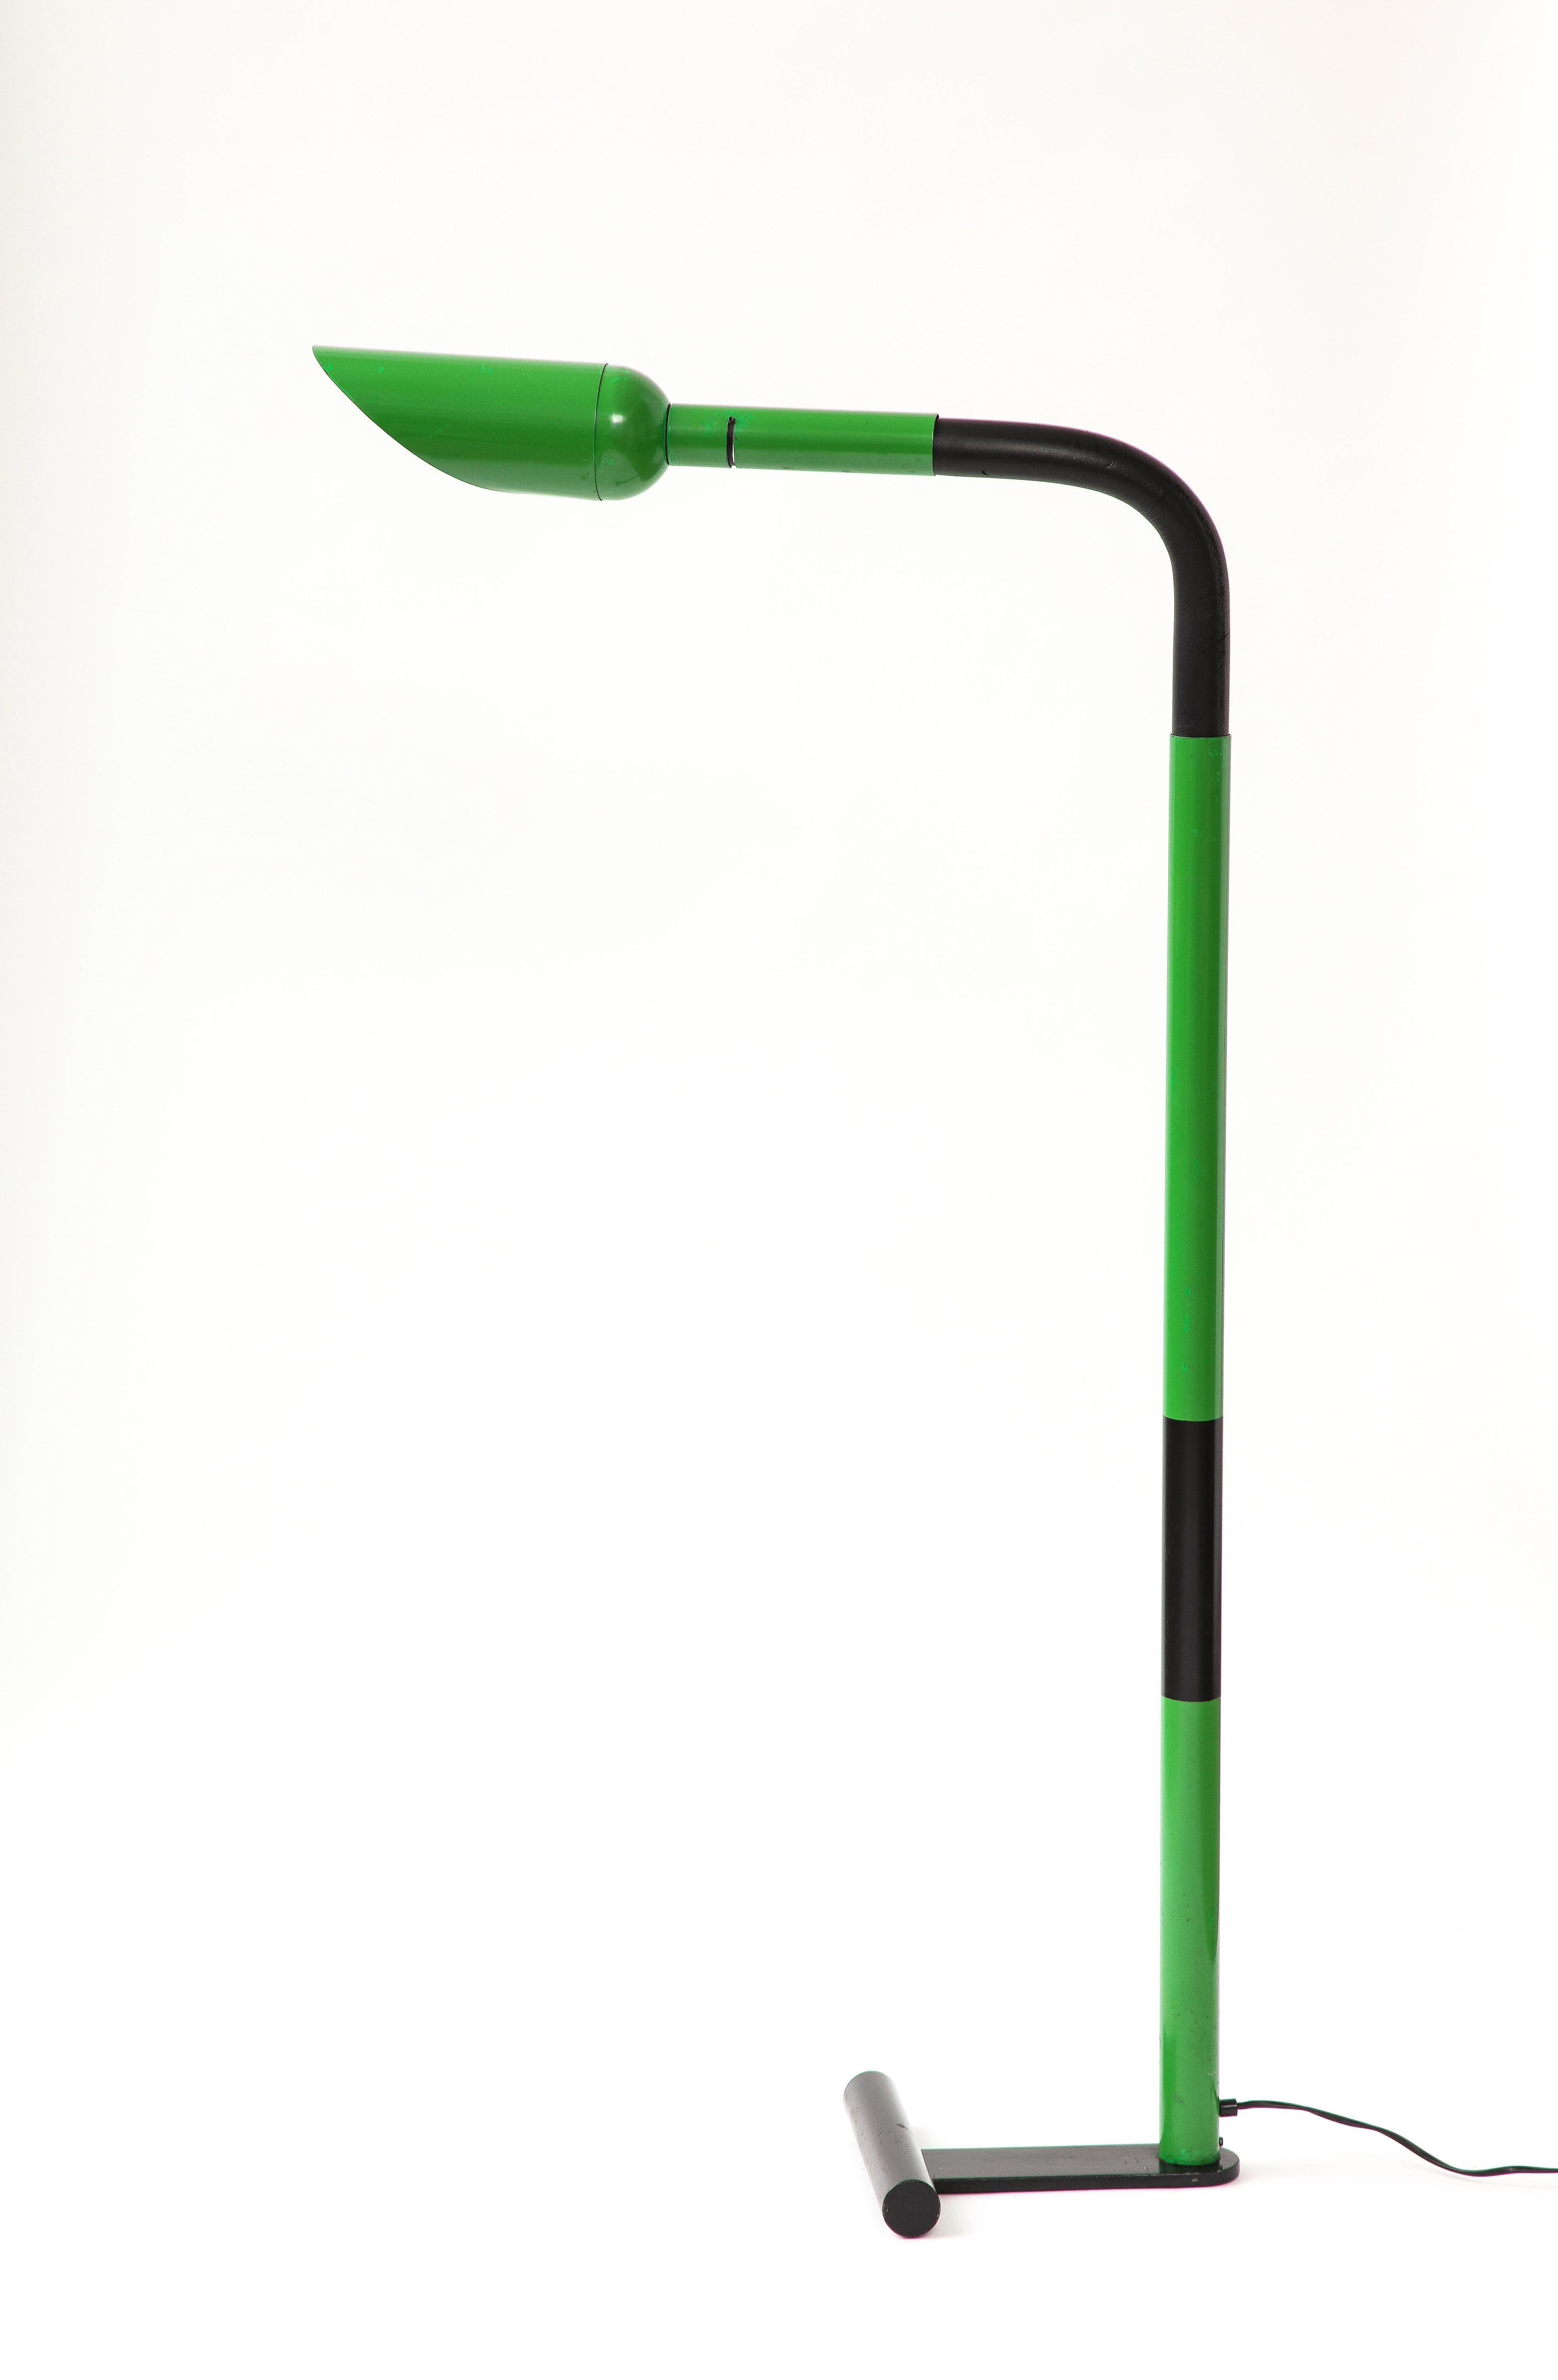 Lacquered green metal floor lamp with an adjustable neck.